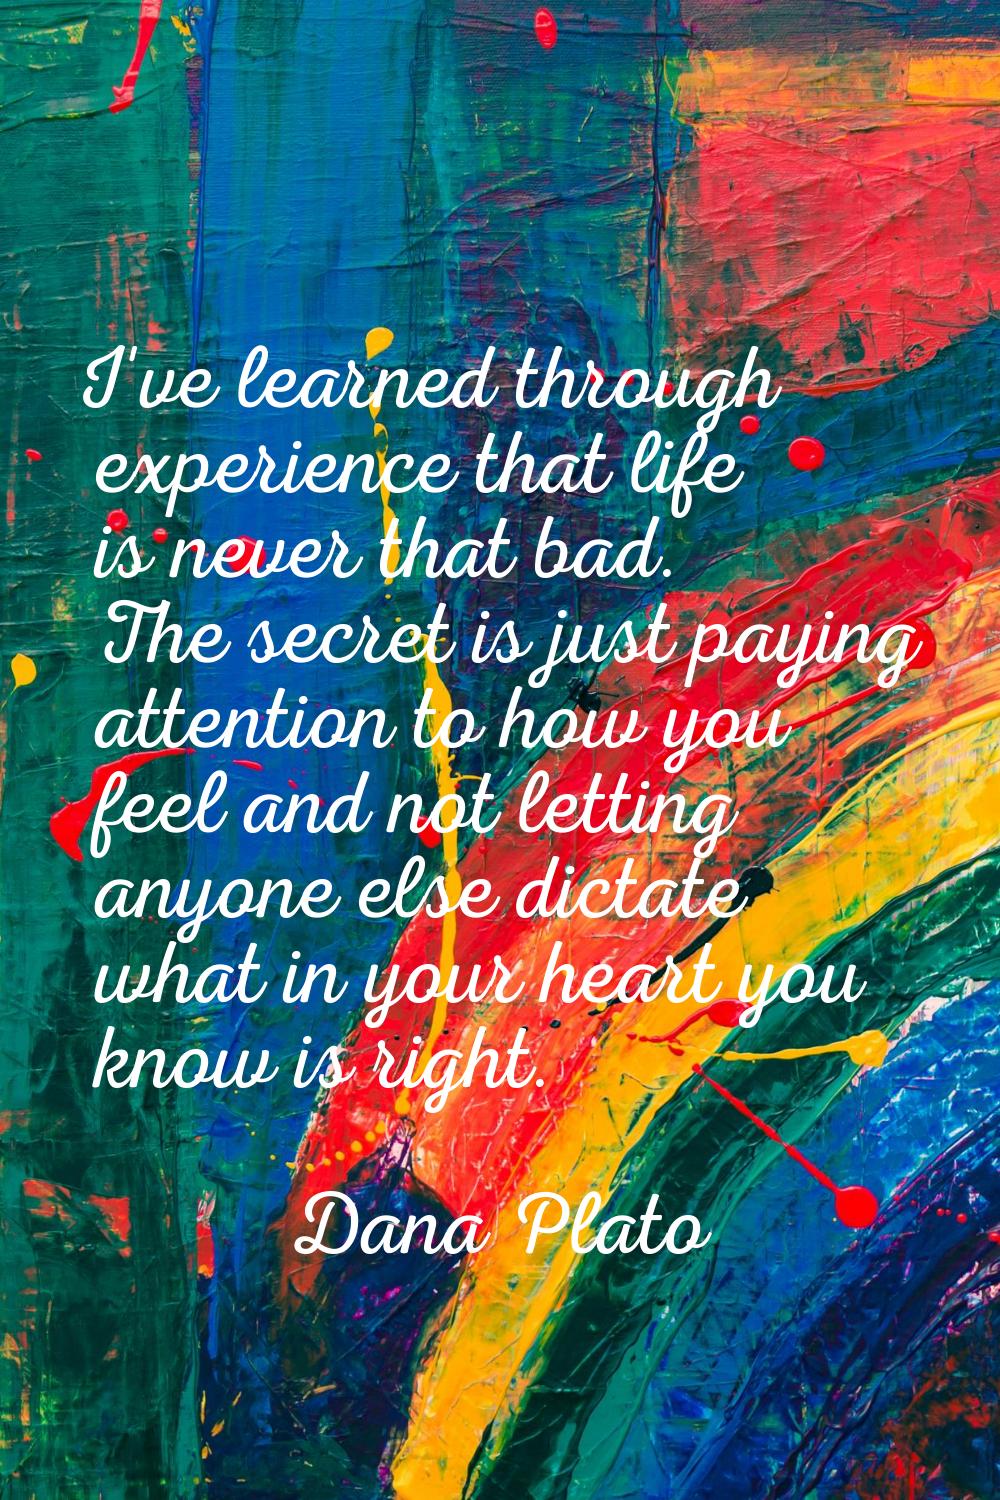 I've learned through experience that life is never that bad. The secret is just paying attention to